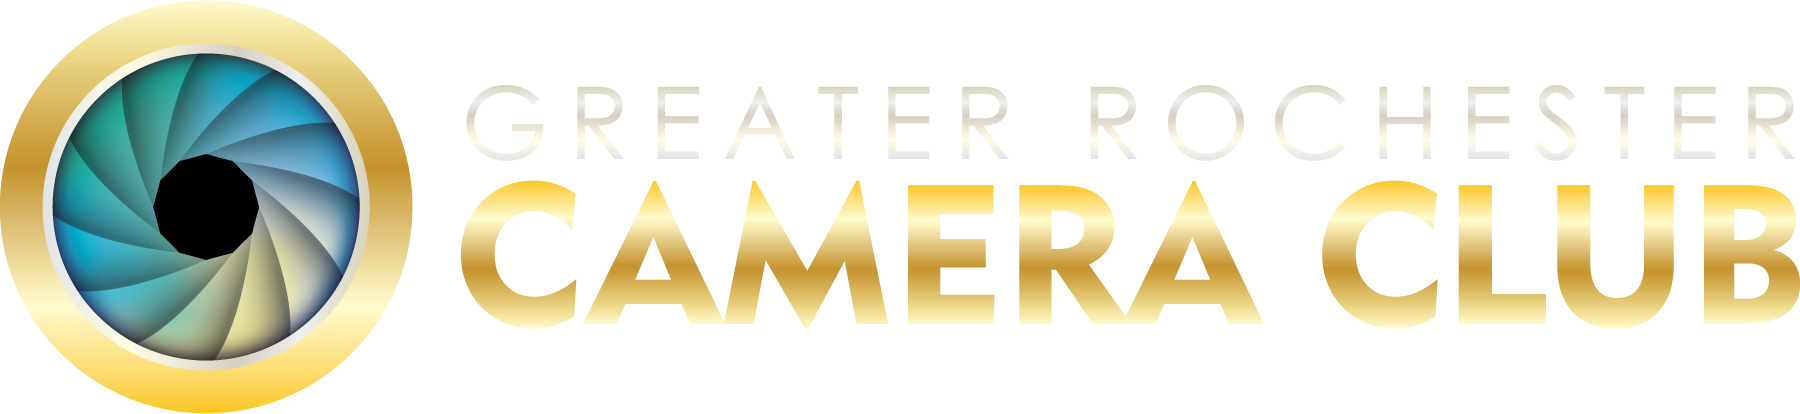 Greater Rochester Camera Club of New Hampshire logo